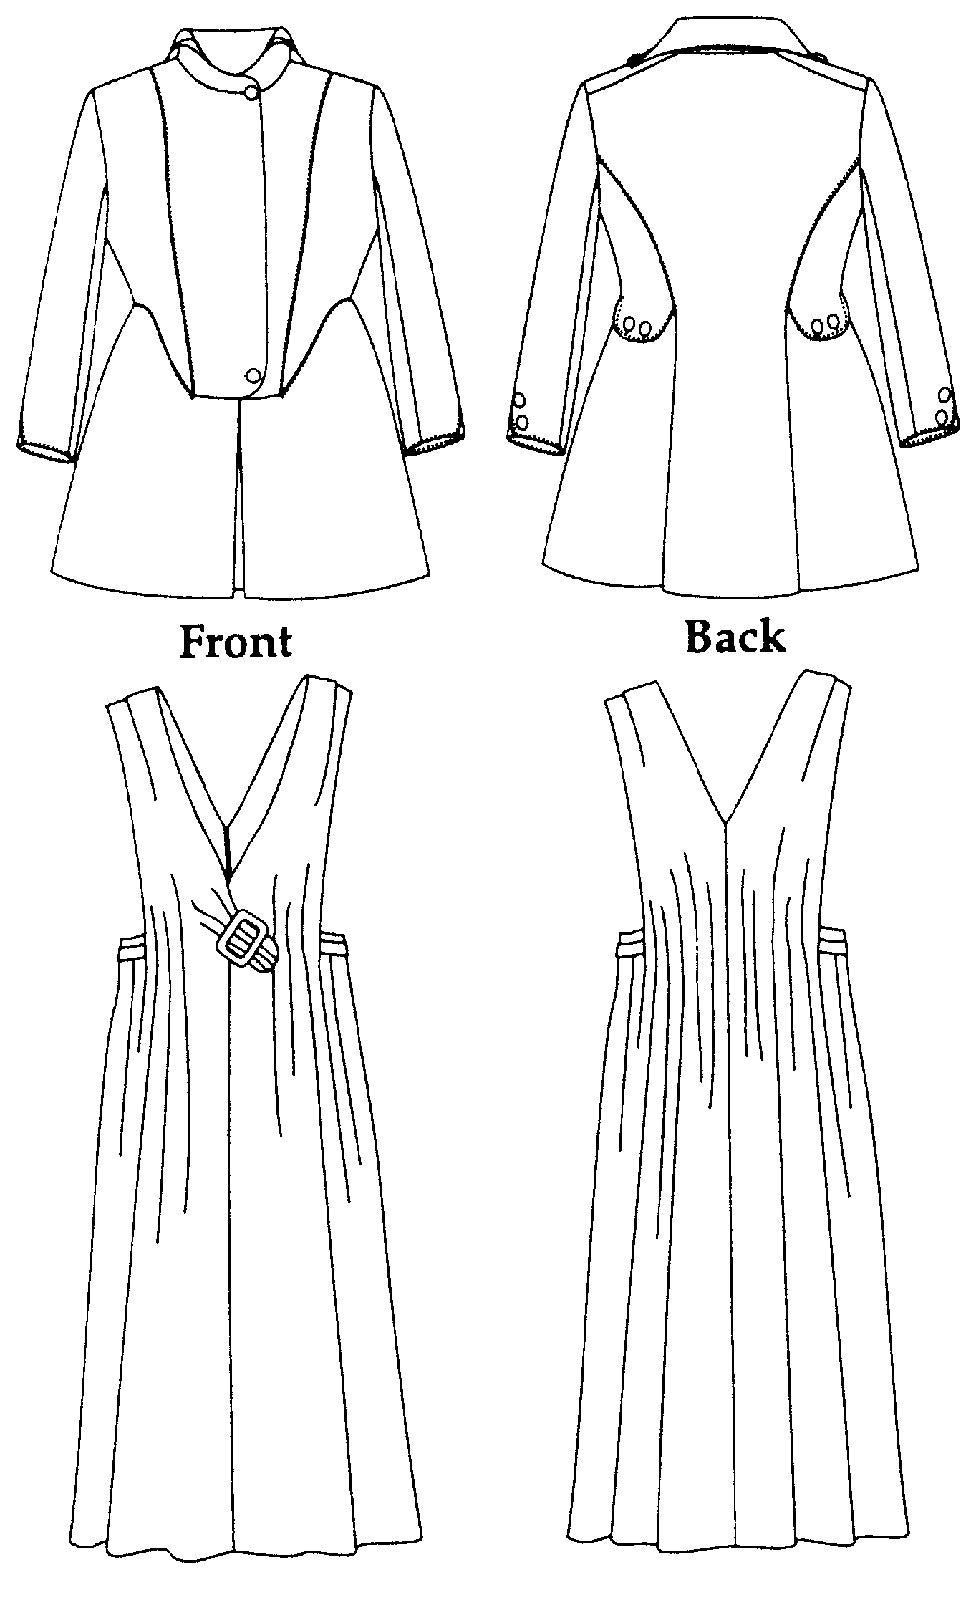 Black and White pattern drawings of the front and back views of the Jacket and Jumper